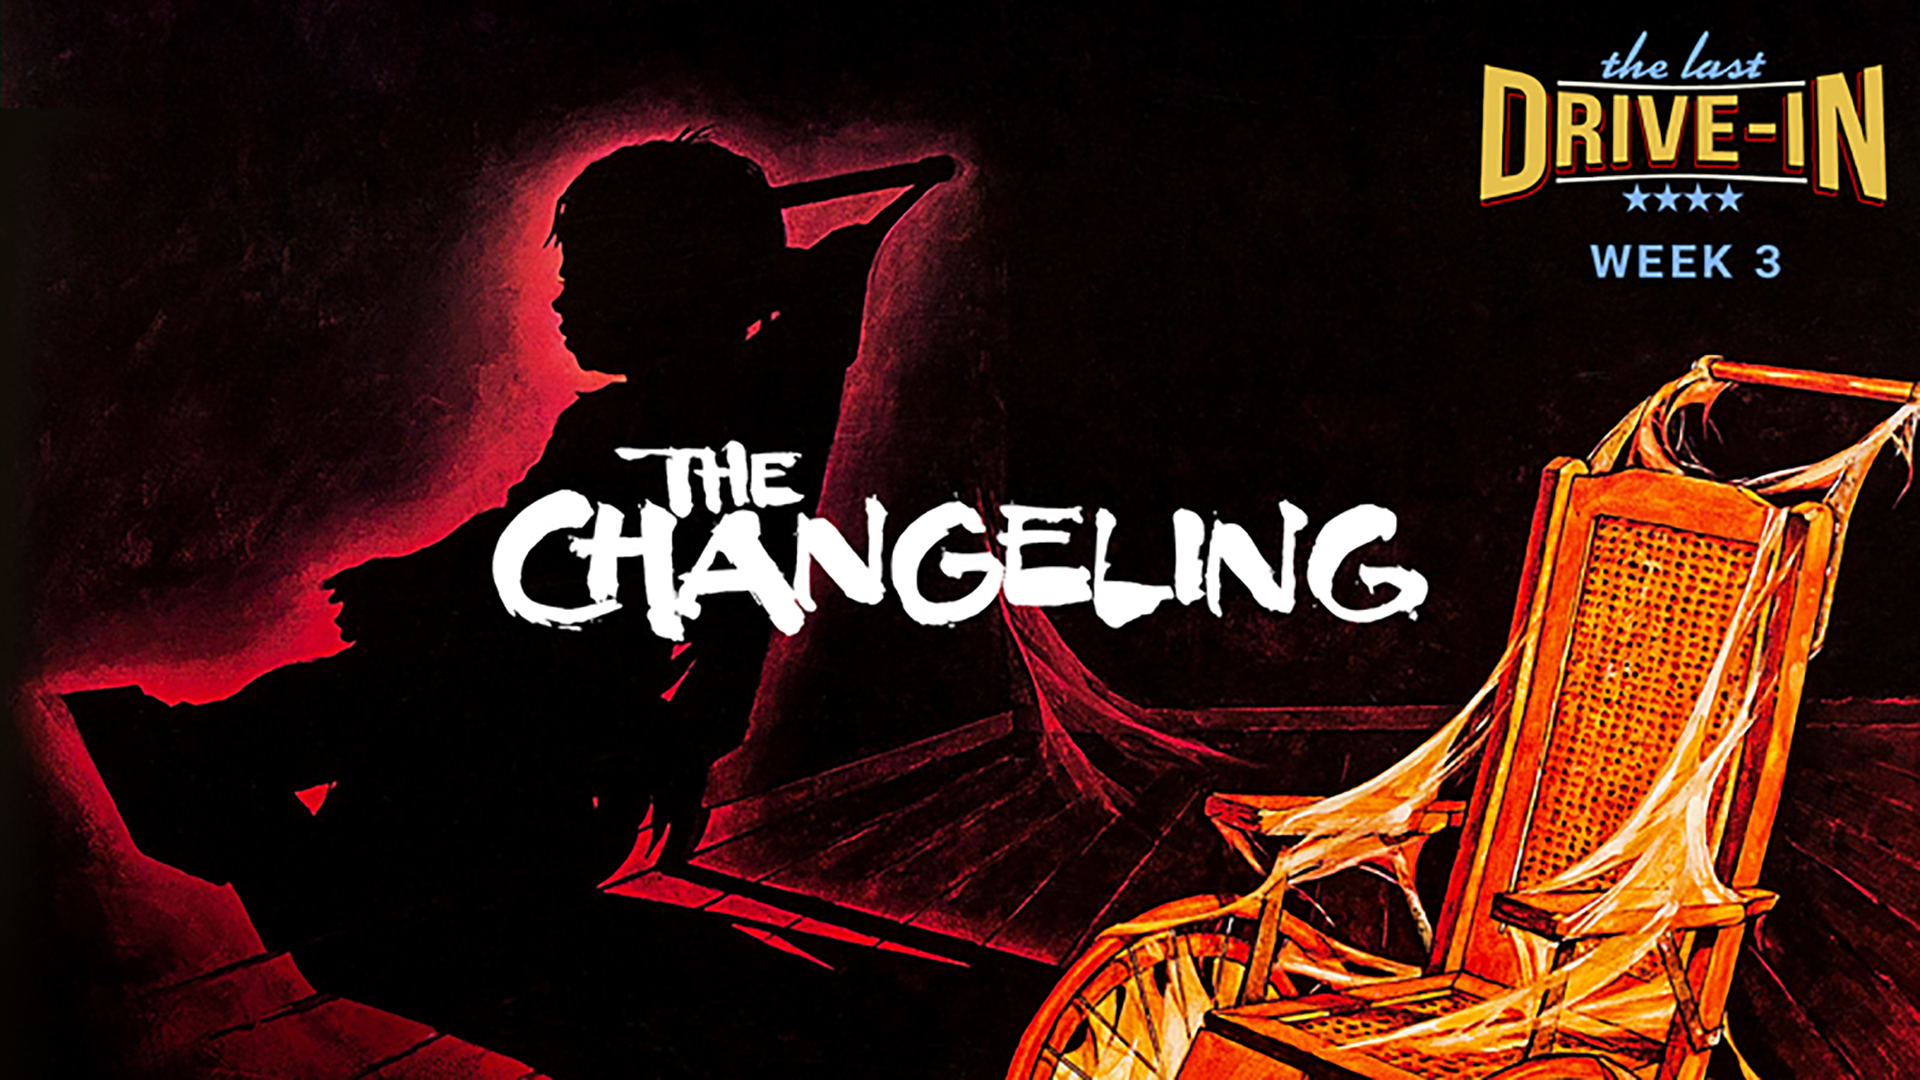 Week 3: The Changeling, In this haunted house essential, a composer moves to a secluded Victorian mansion inhabited by a paranormal entity., TV-MA, Season 1028421, Episode 6